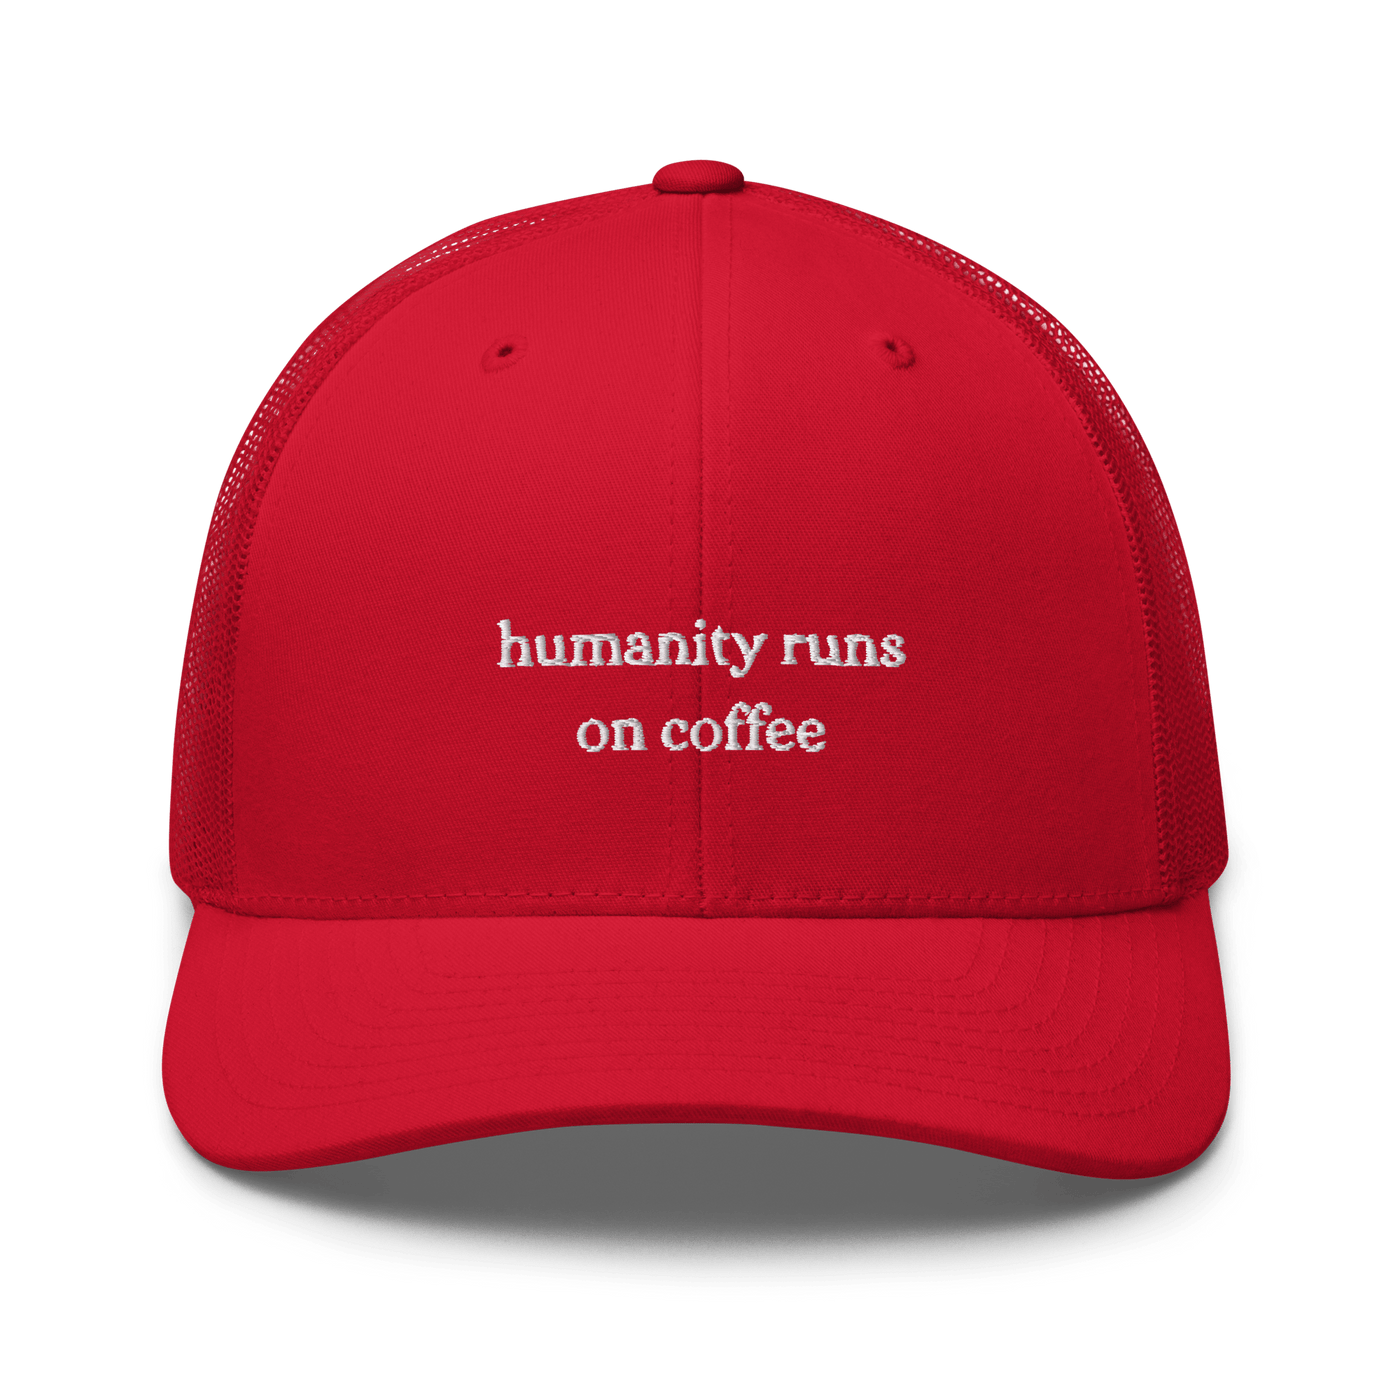 Humanity Runs on Coffee Trucker Cap - Red - - Just Another Cap Store